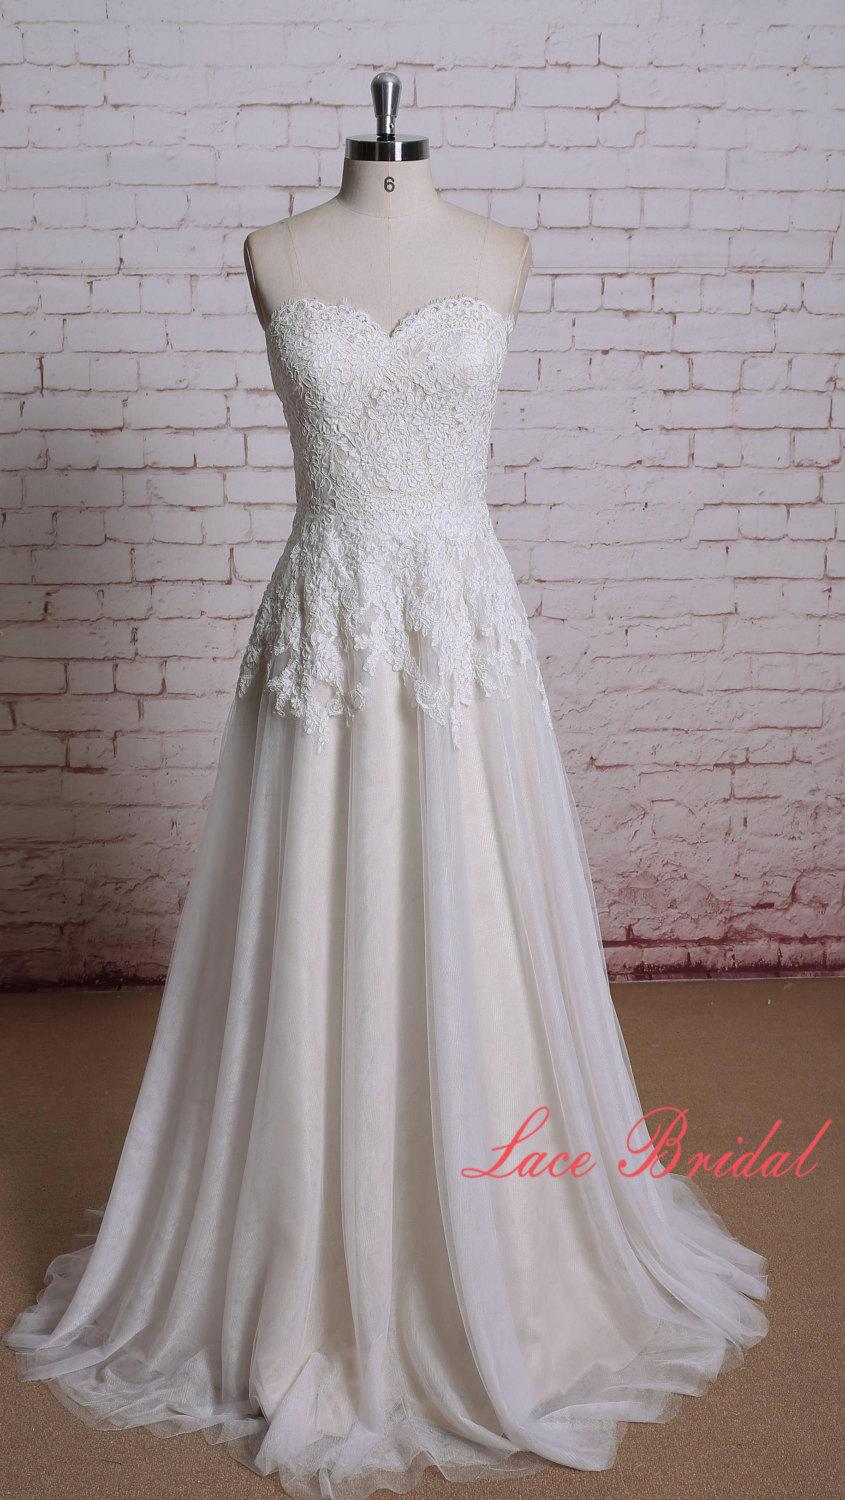 Hochzeit - Wedding dress of Sweetheart Neckline Ivory Color Lace with Champange underlay Bridal Gown A-line Wedding Dress with Sweep Train